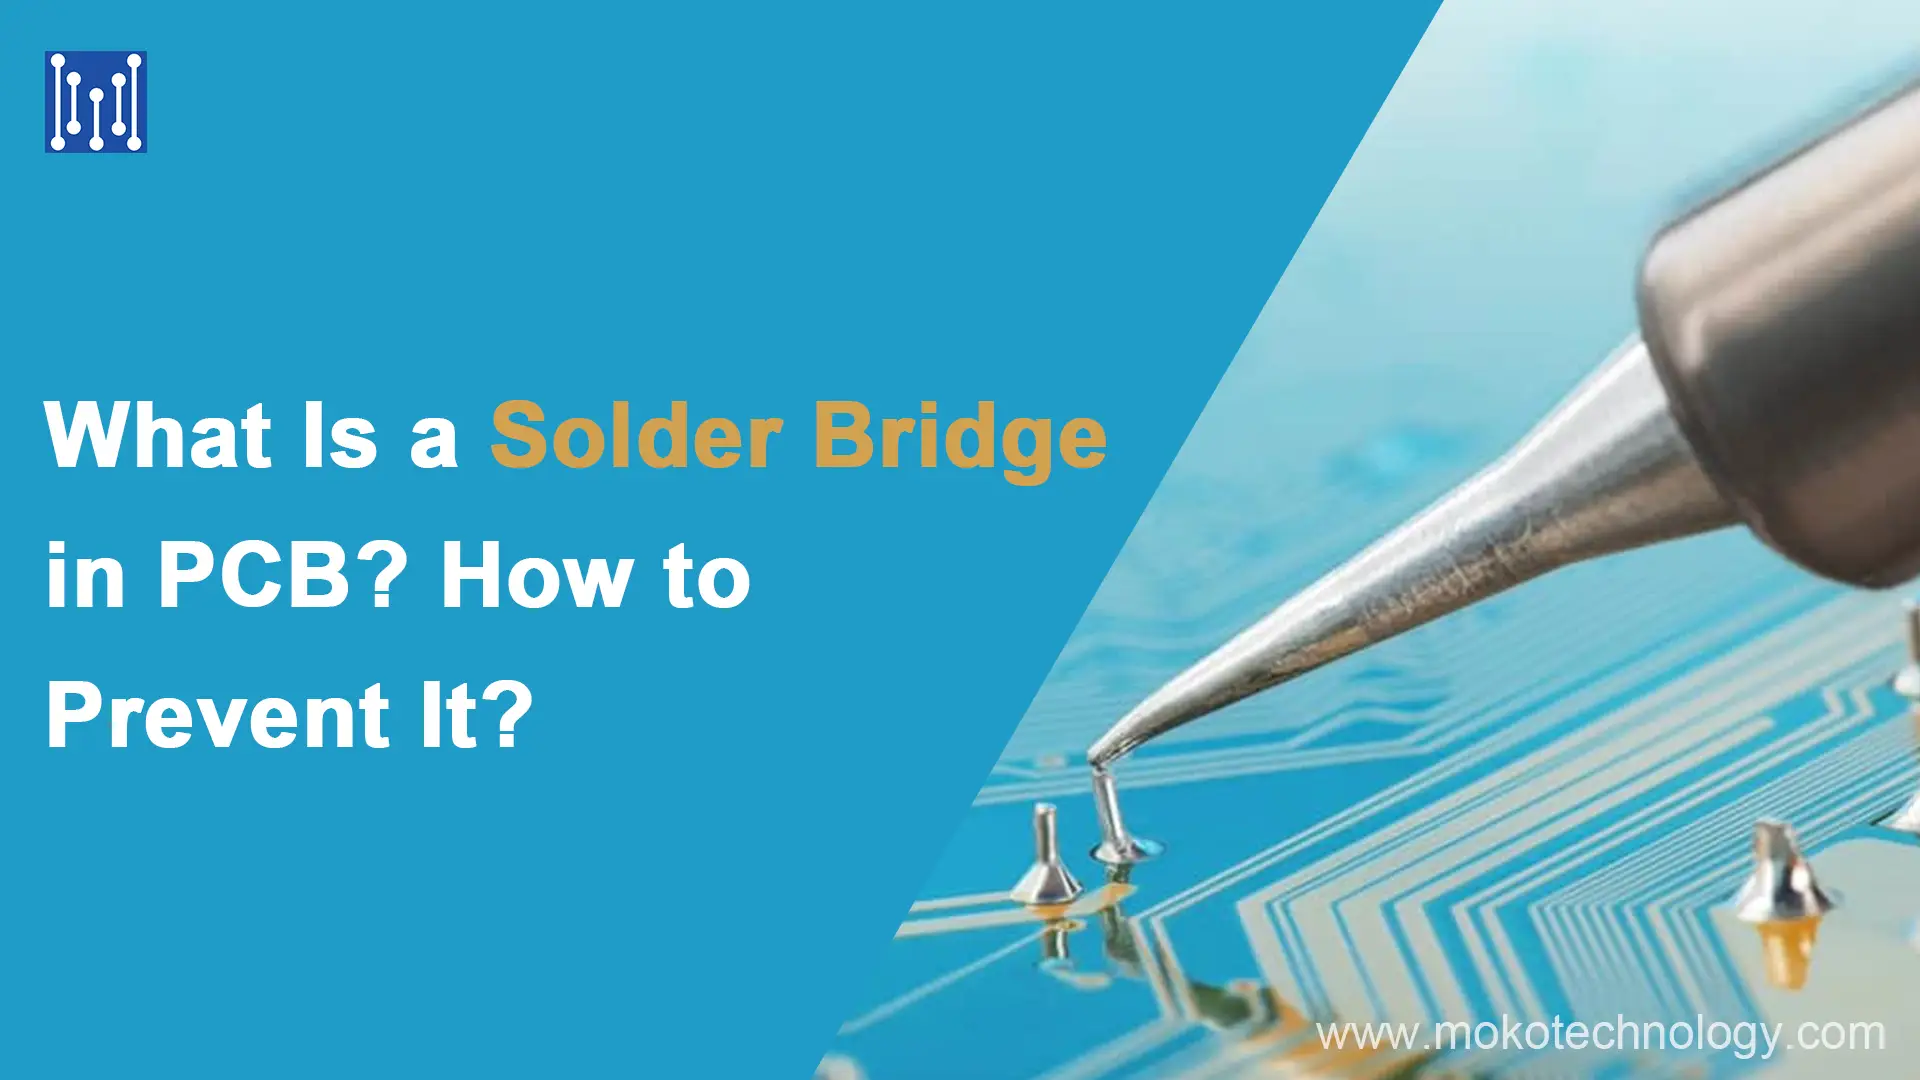 What Is a Solder Bridge in PCB